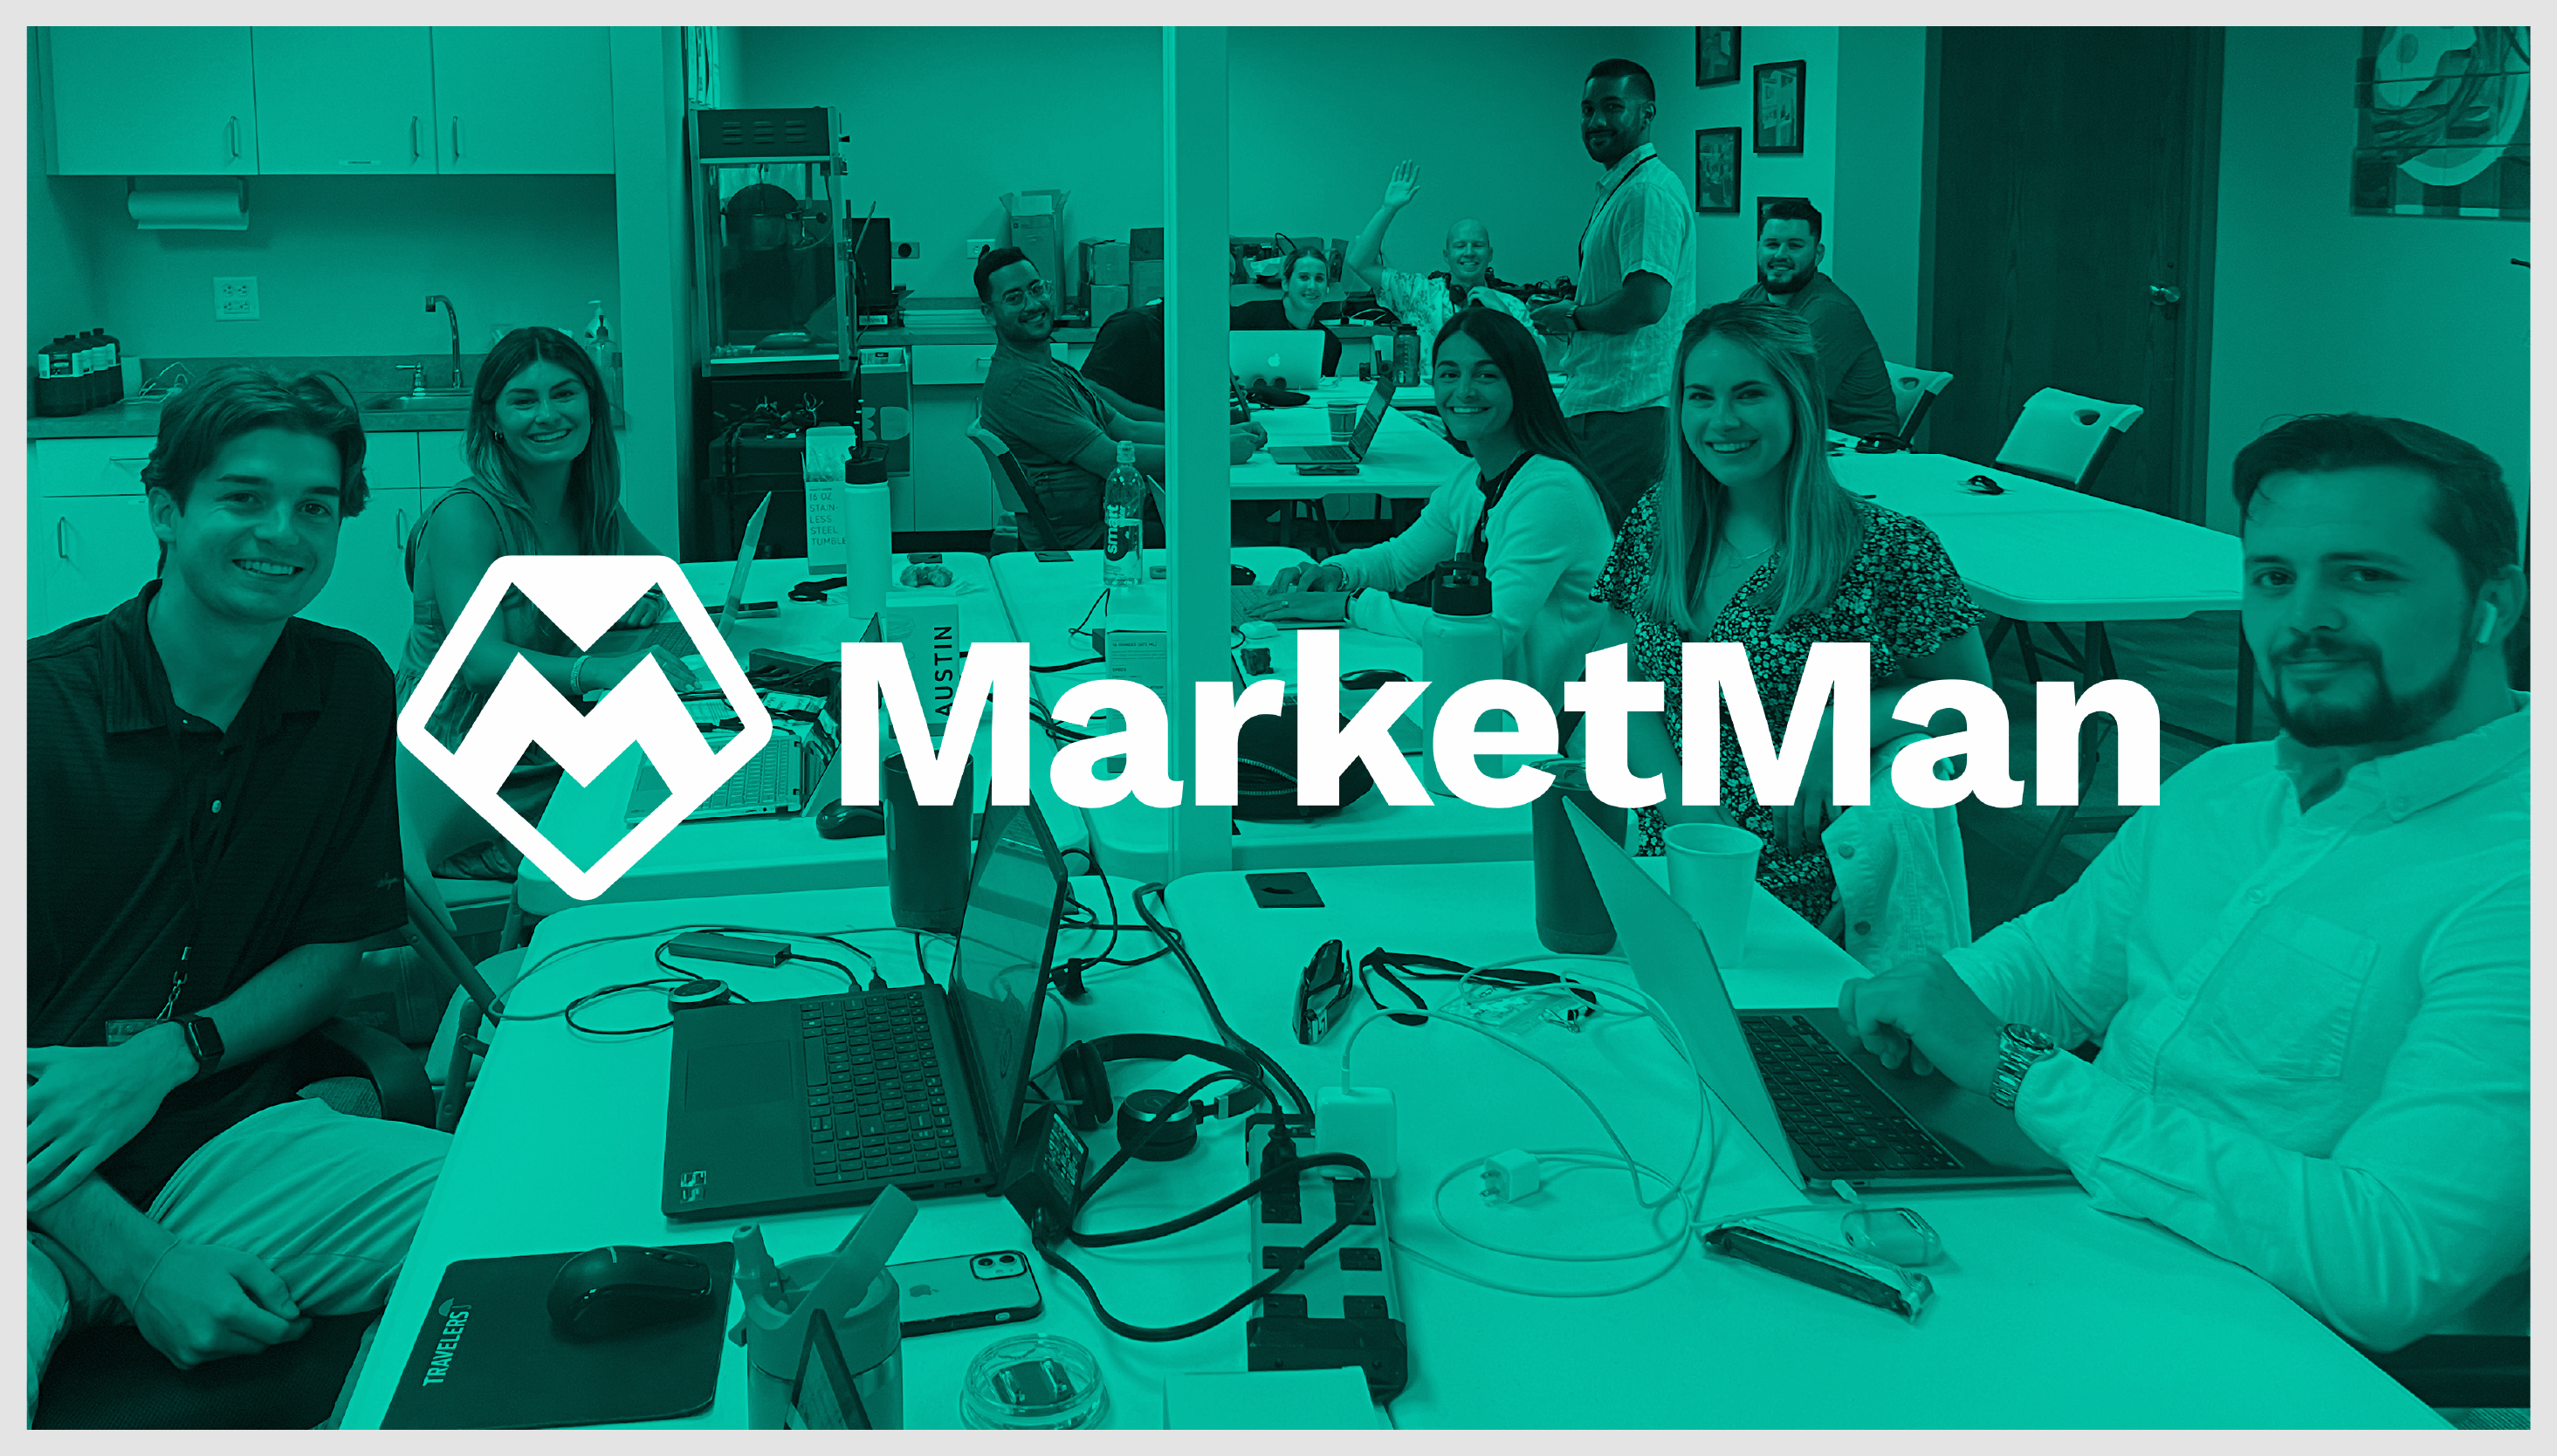 MarketMan logo overlapping a photograph of MarketMan employees working in the office